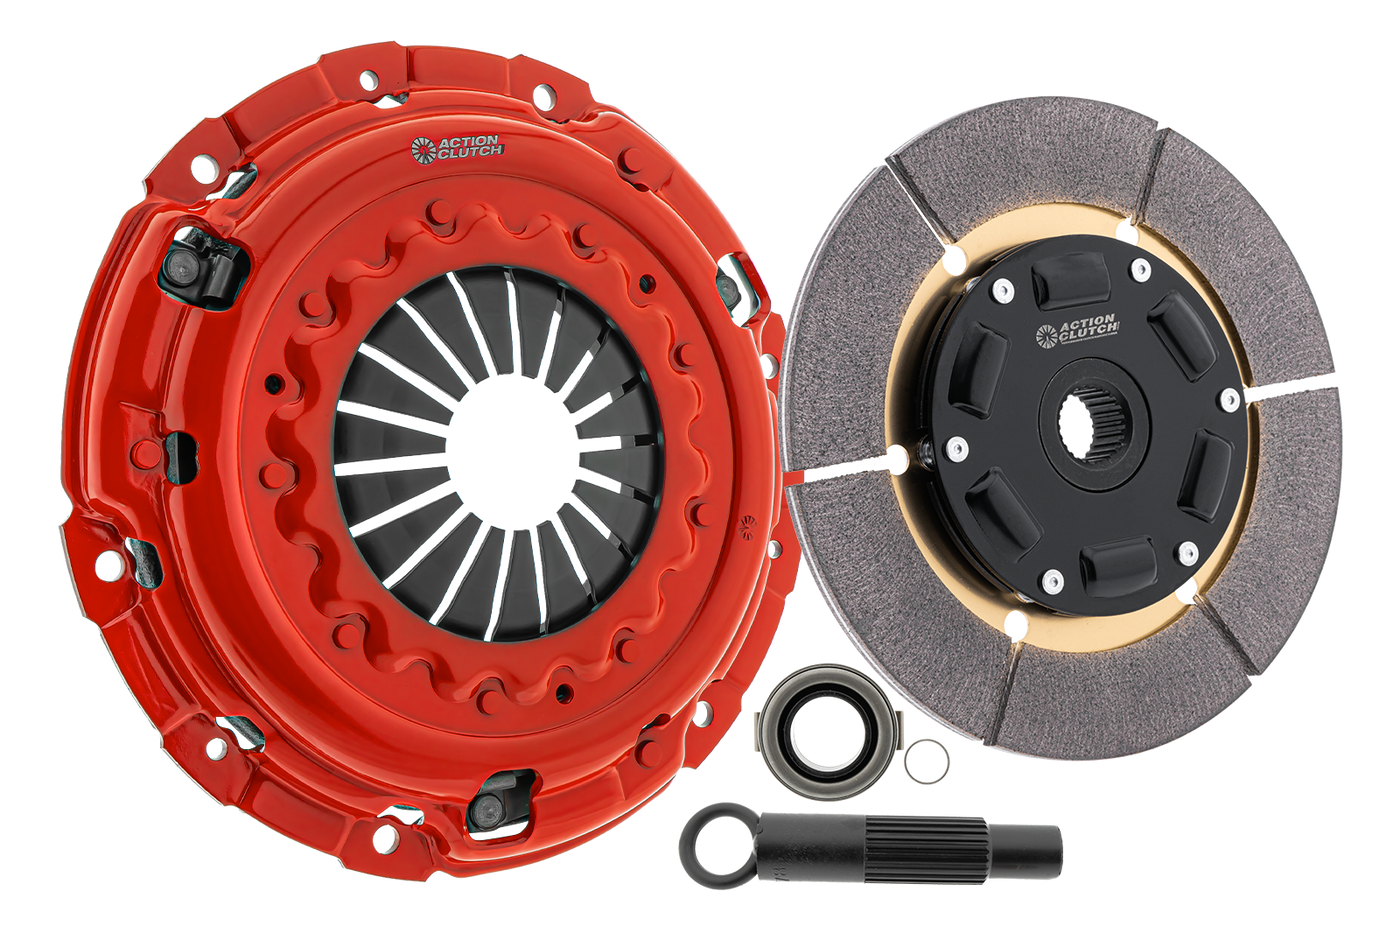 Ironman Sprung (Street) Clutch Kit for Plymouth Laser RS 1990-1994 2.0L DOHC (4G63T) Turbo AWD